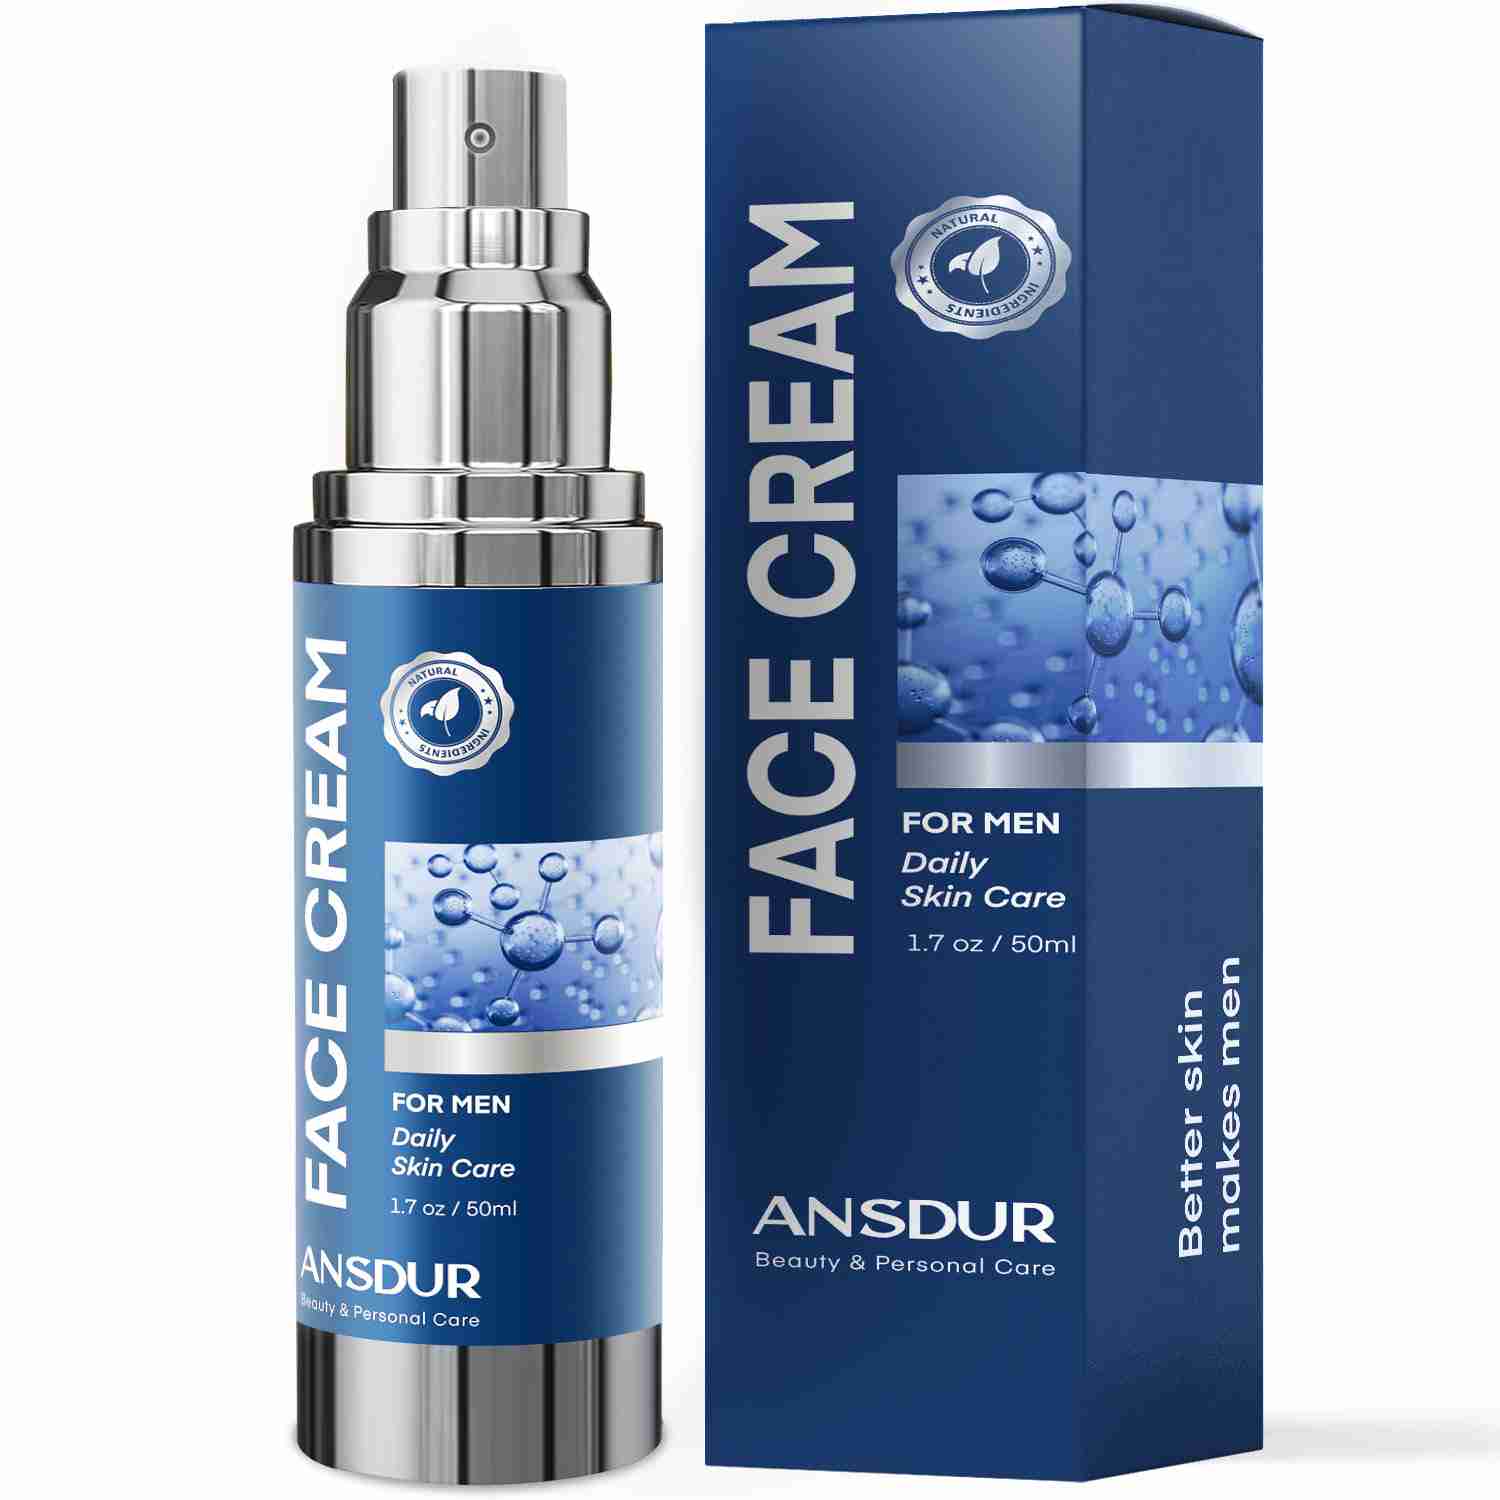 face-cream-for-men with cash back rebate